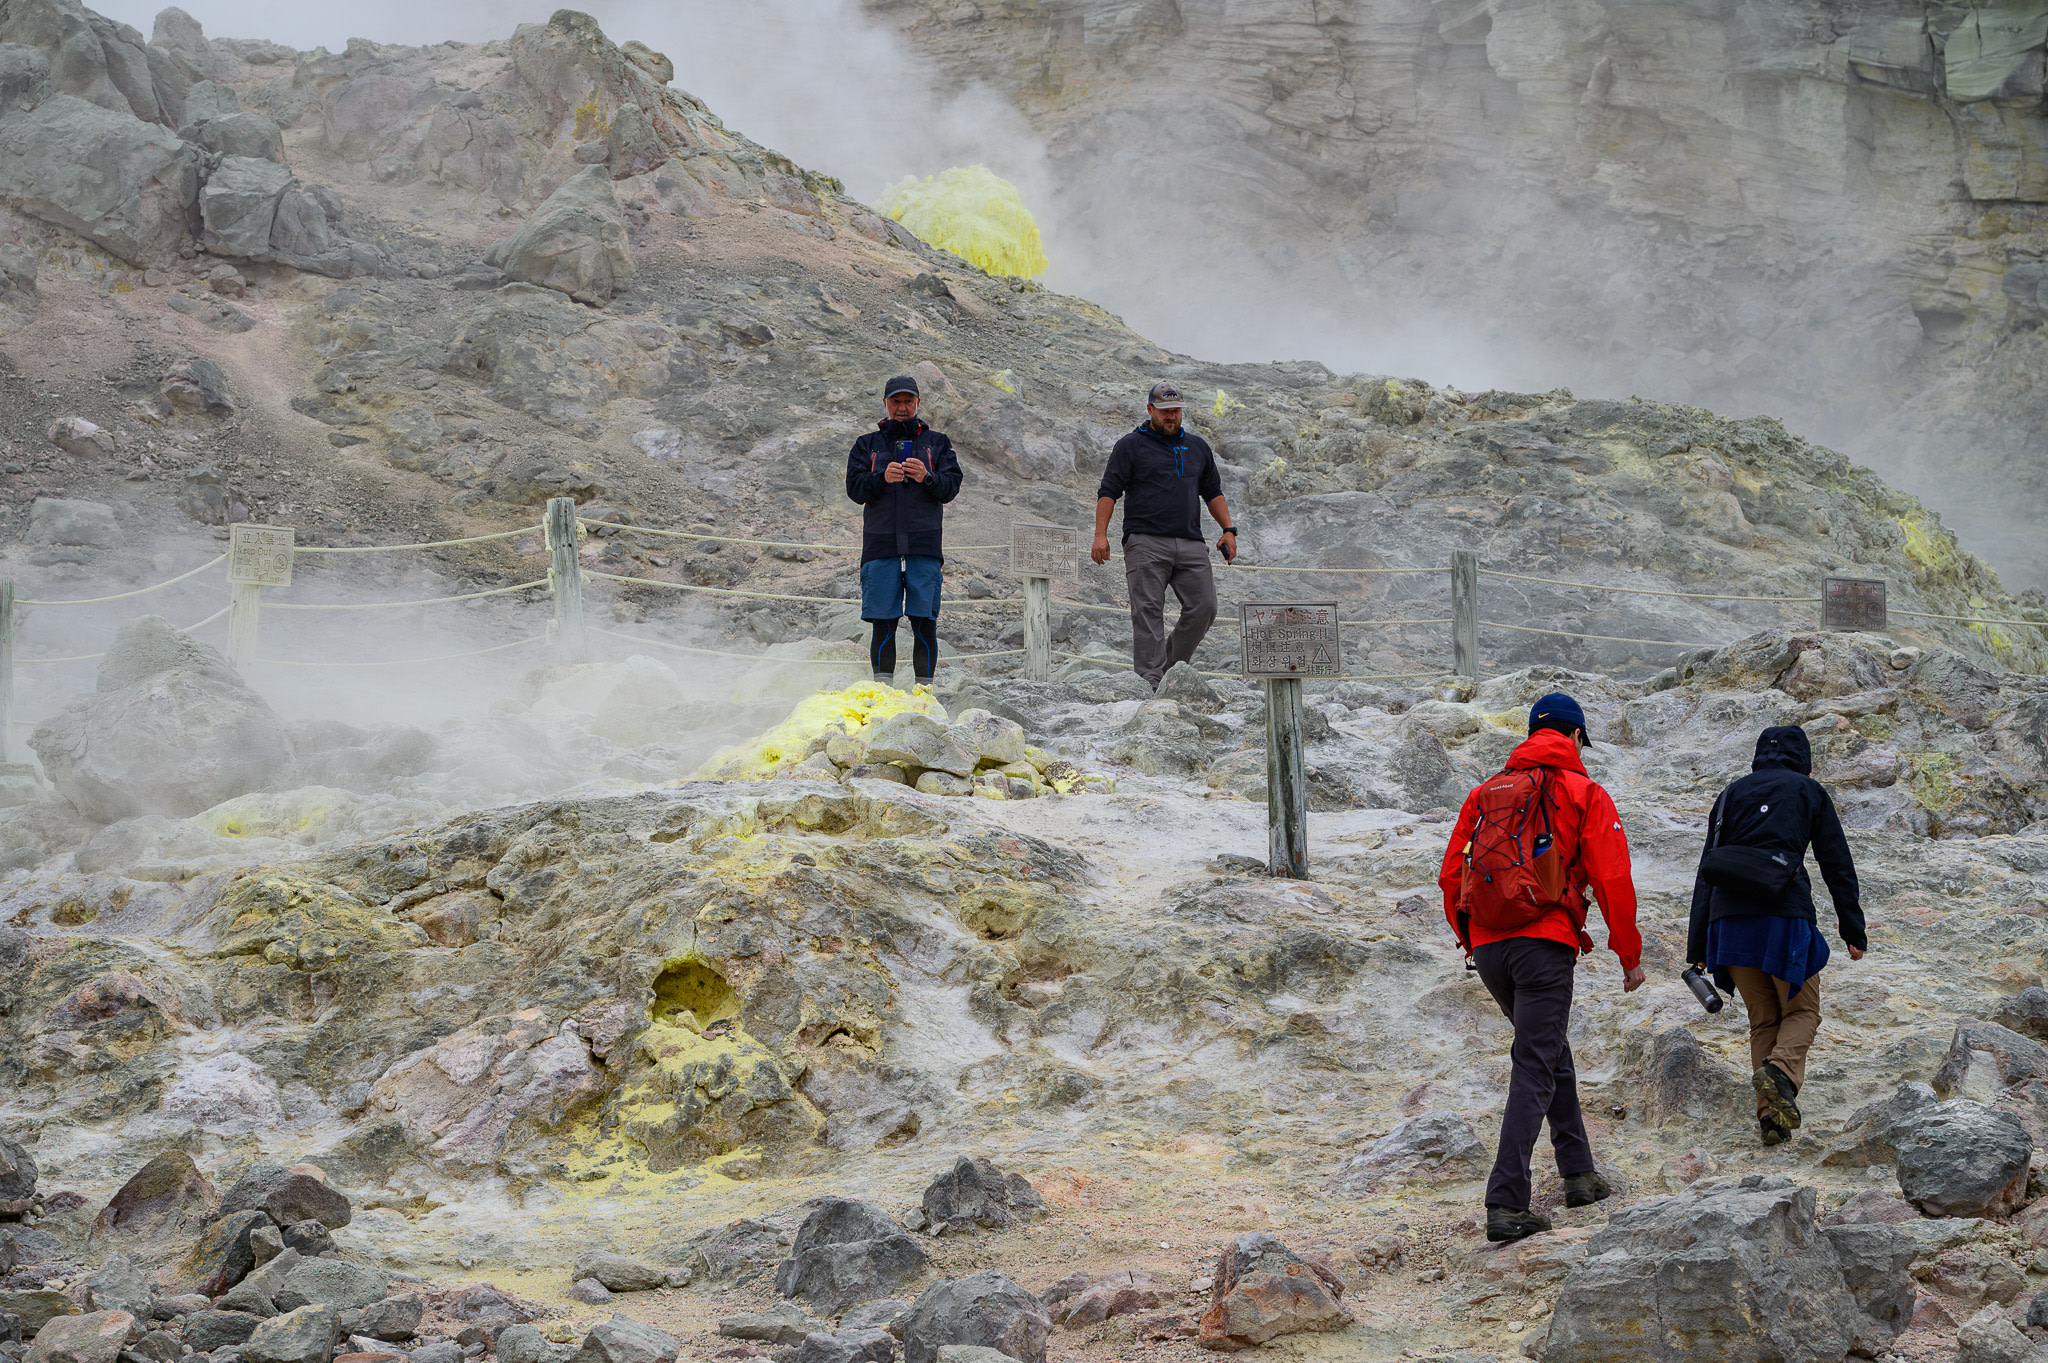 Four guides walk around Mt. Io's otherworldly landscape, dotted by sulfuric fumaroles.